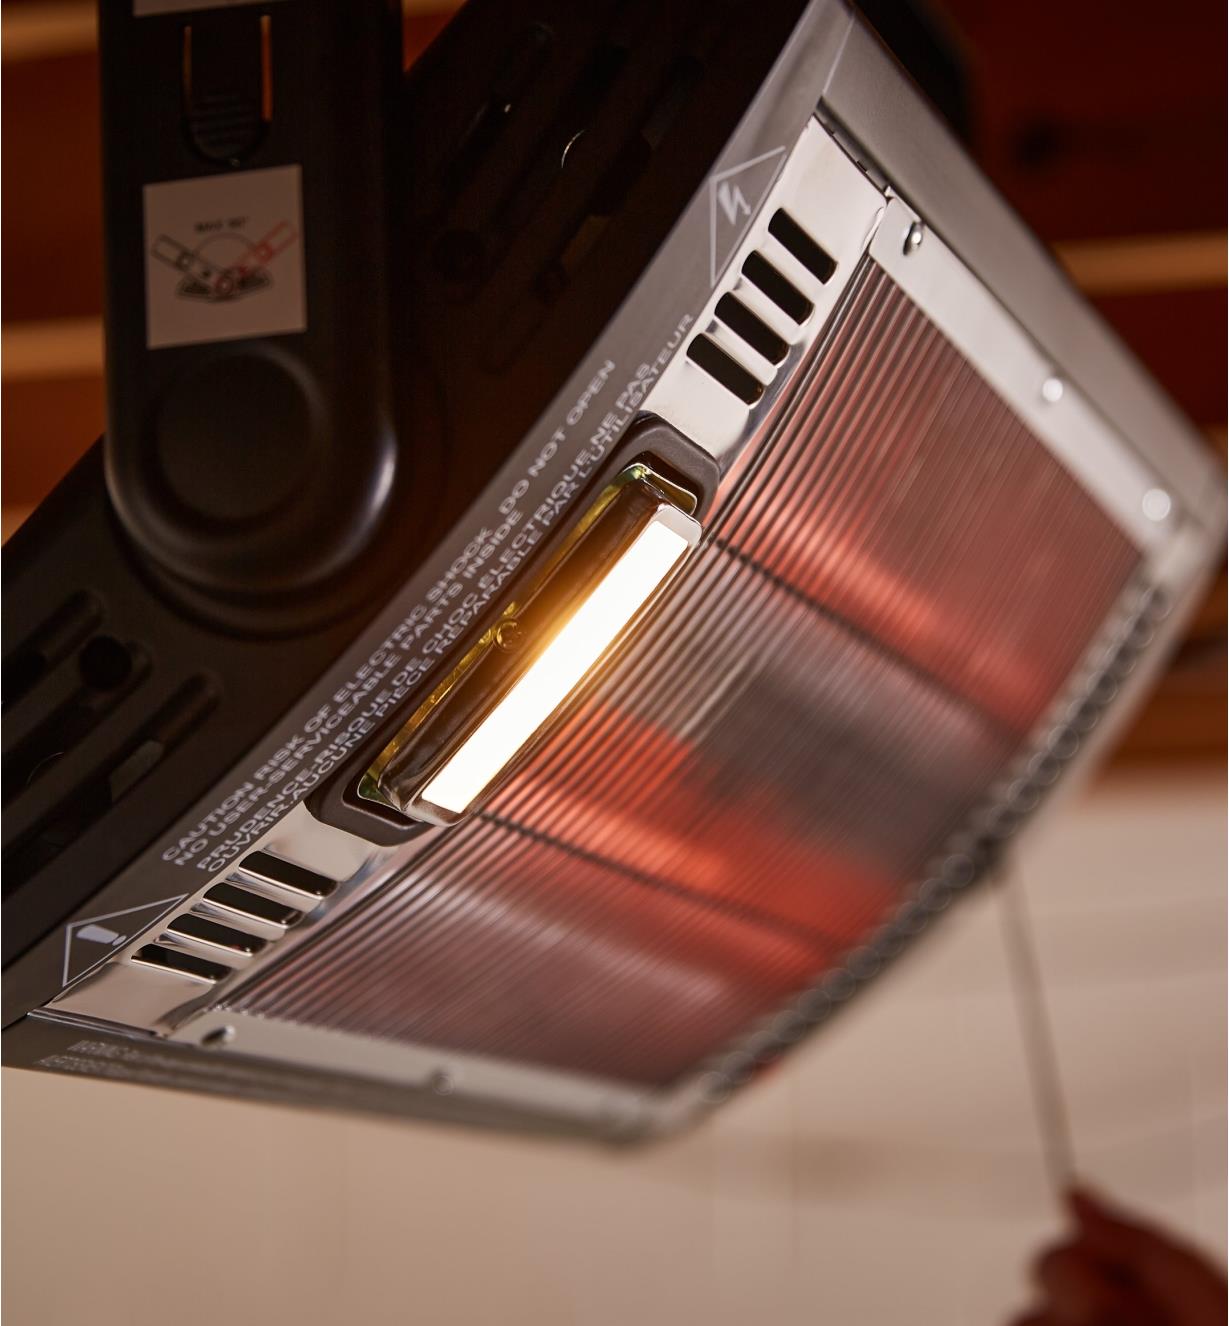 Close-up of the built-in 25W halogen lamp on the Quartz Overhead Radiant Heater